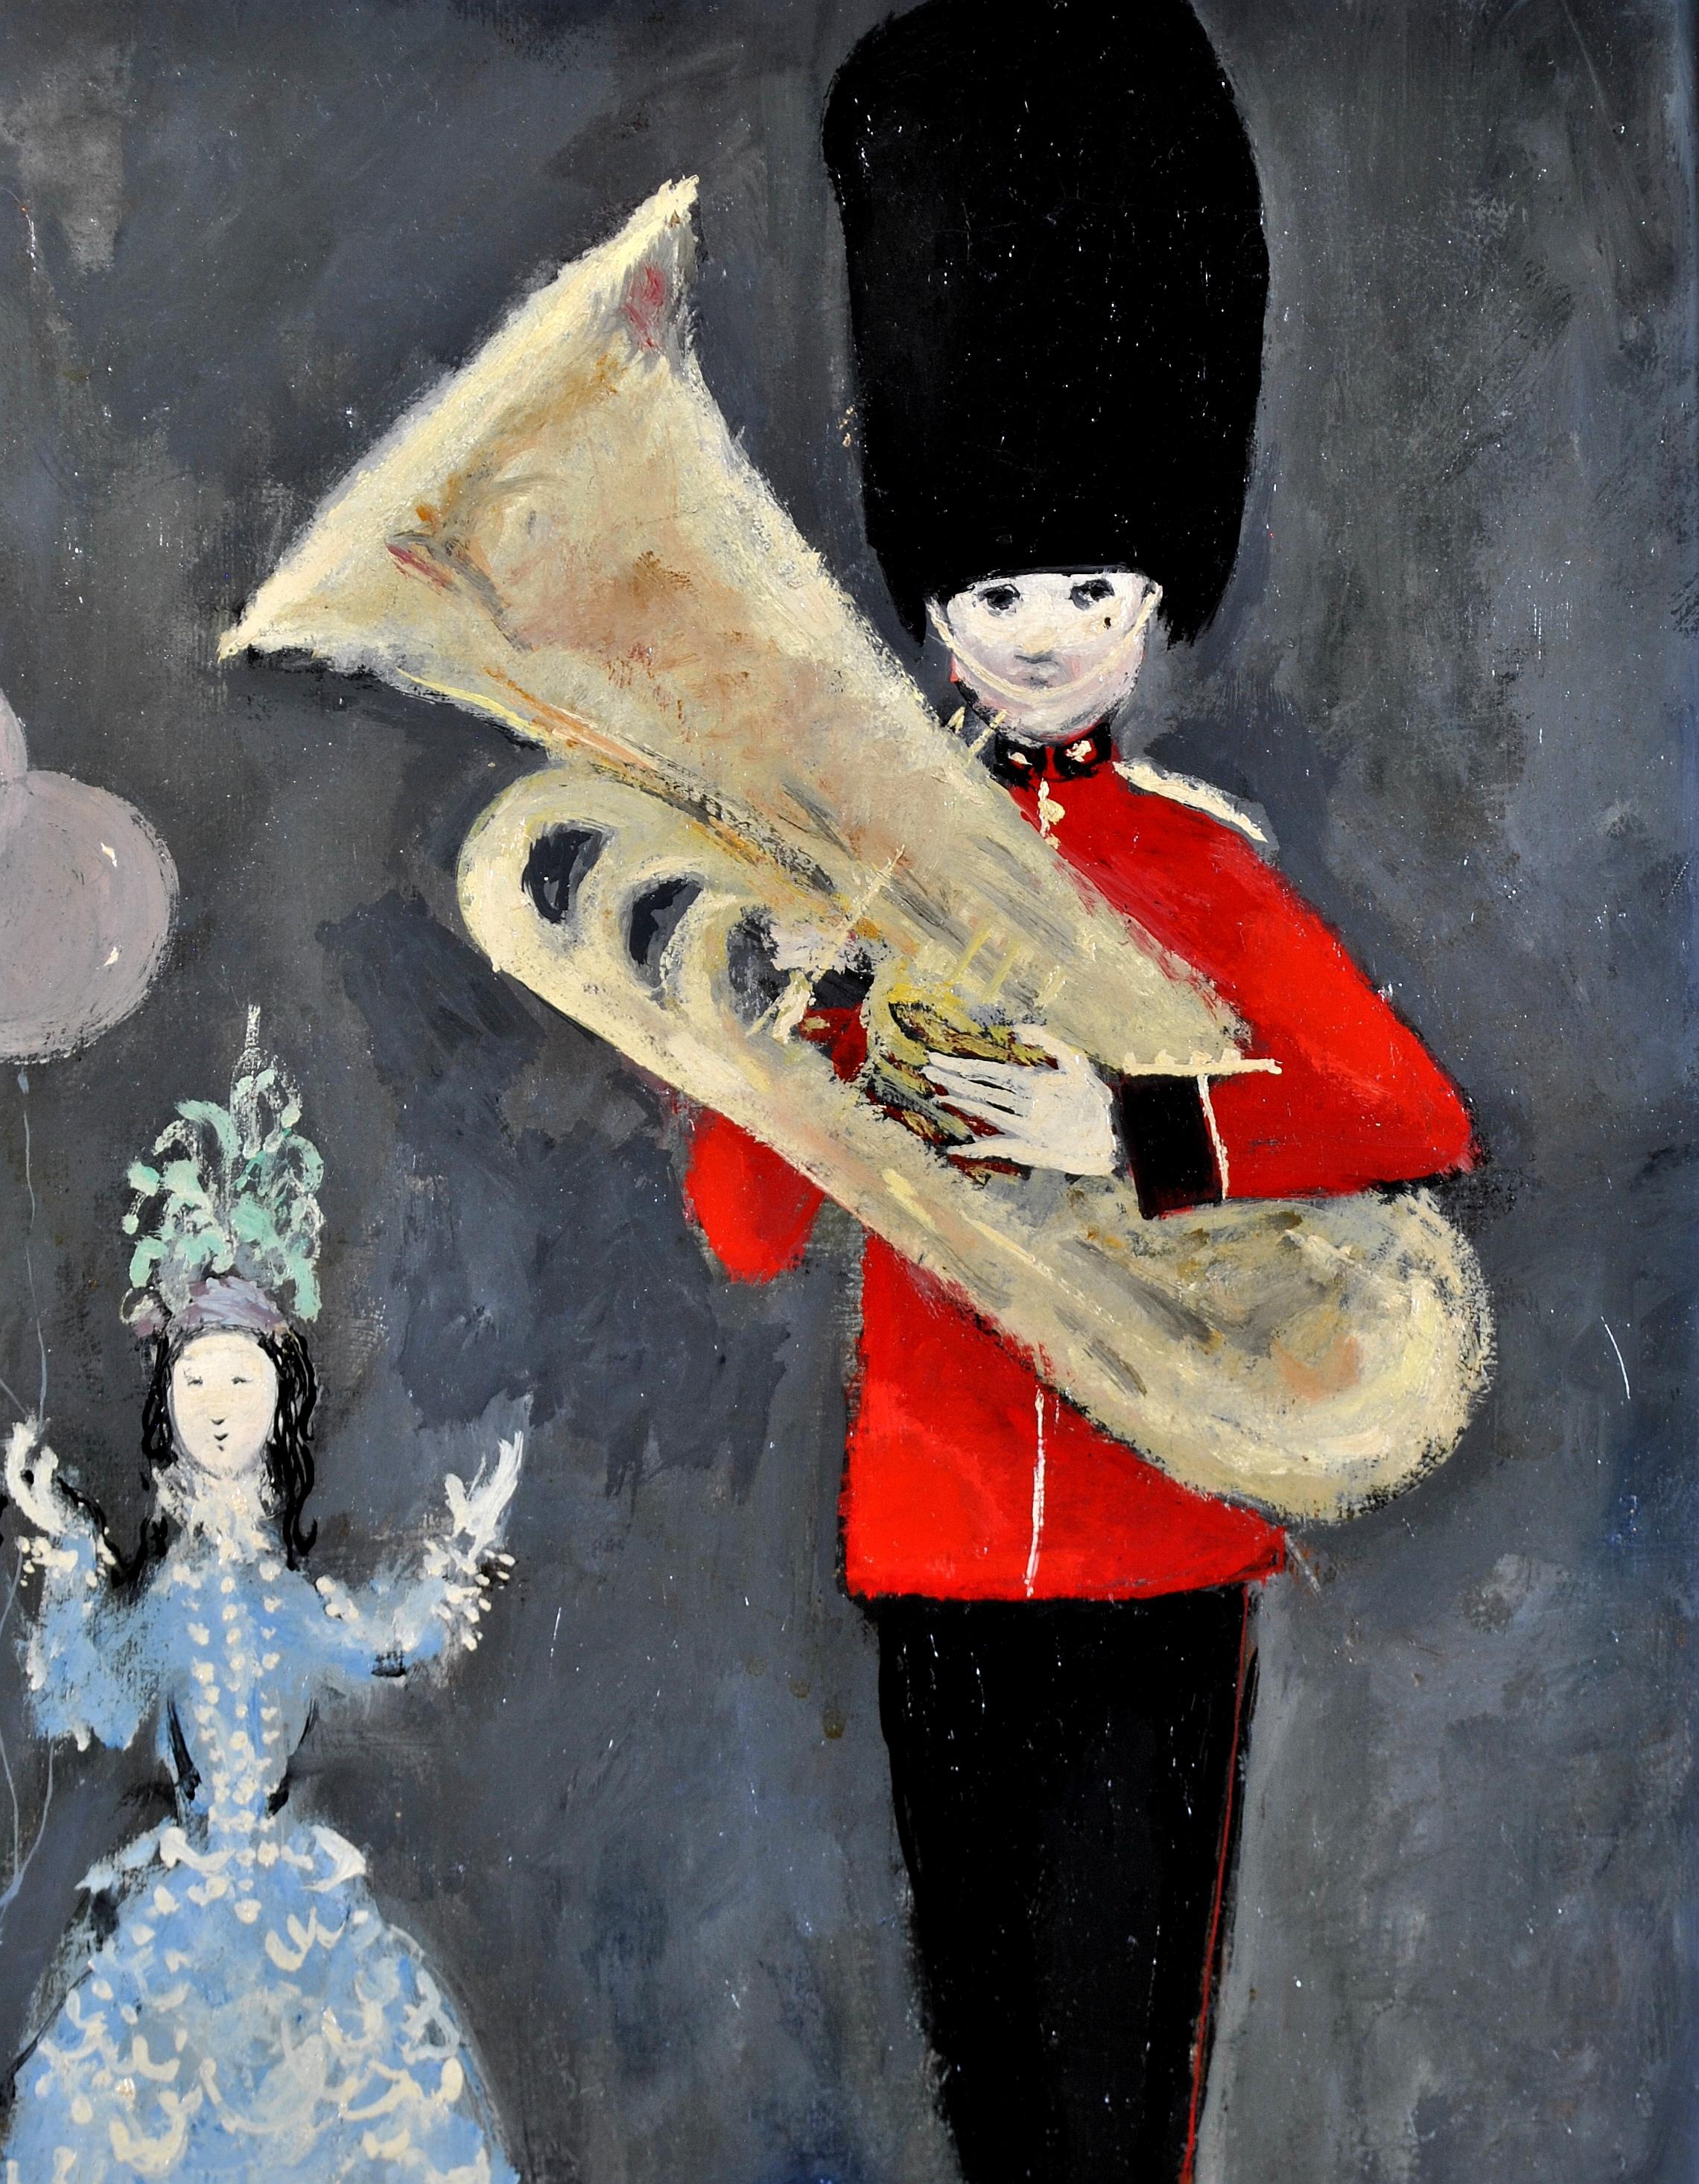 A beautifully whimsical c.1930 oil on canvas titled ''St. James Palace'' by Paul Lucien Dessau which depicts a Guardsman with a tuba and a young girl holding balloons. The artist is best known for his WW2 portraits of servicemen and women that he